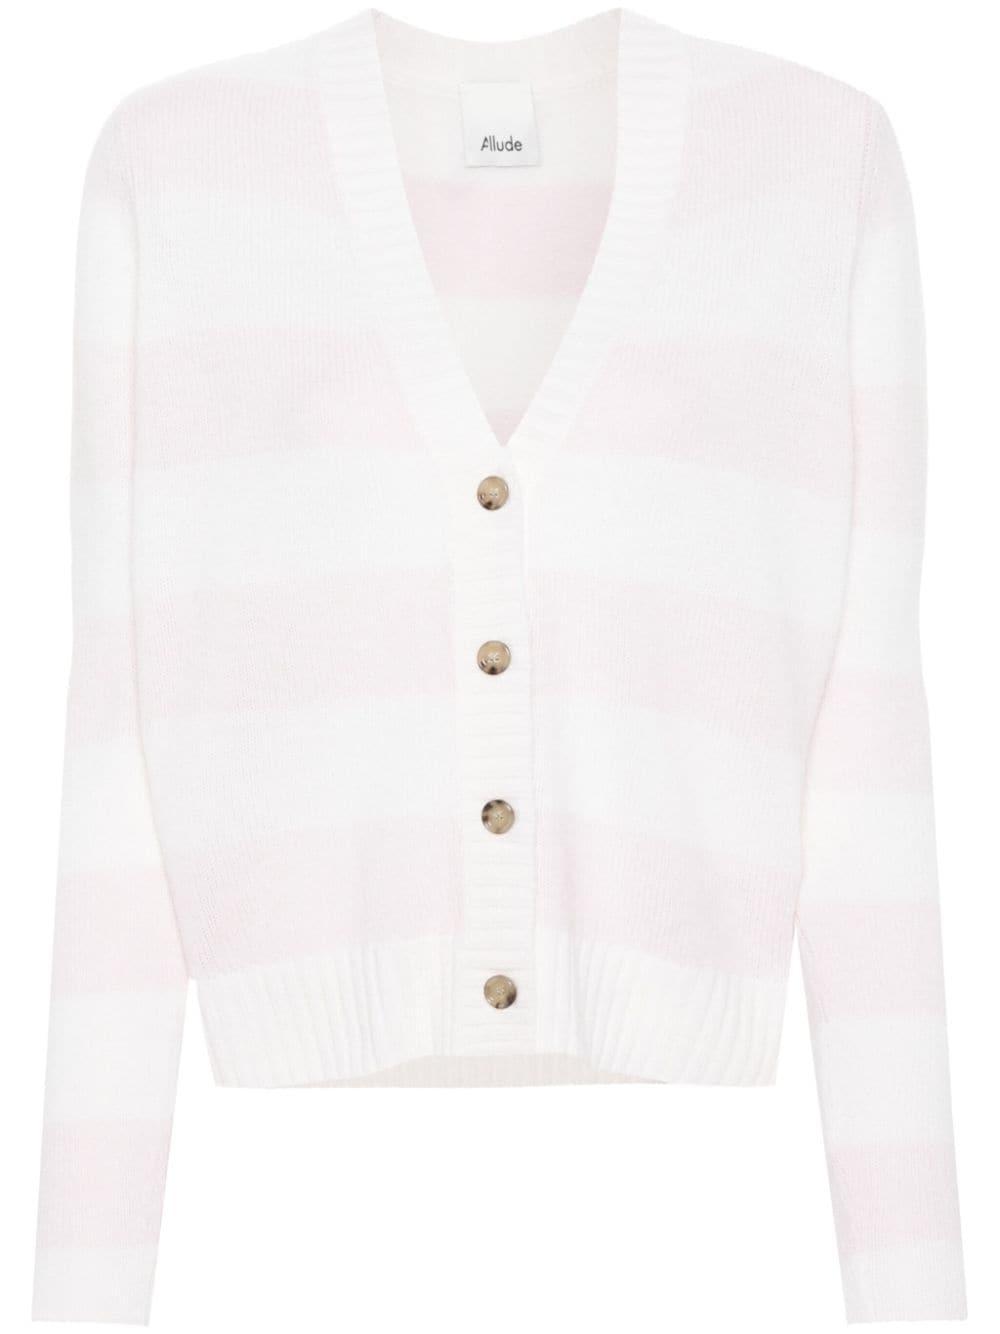 Image 1 of Allude striped V-neck cardigan